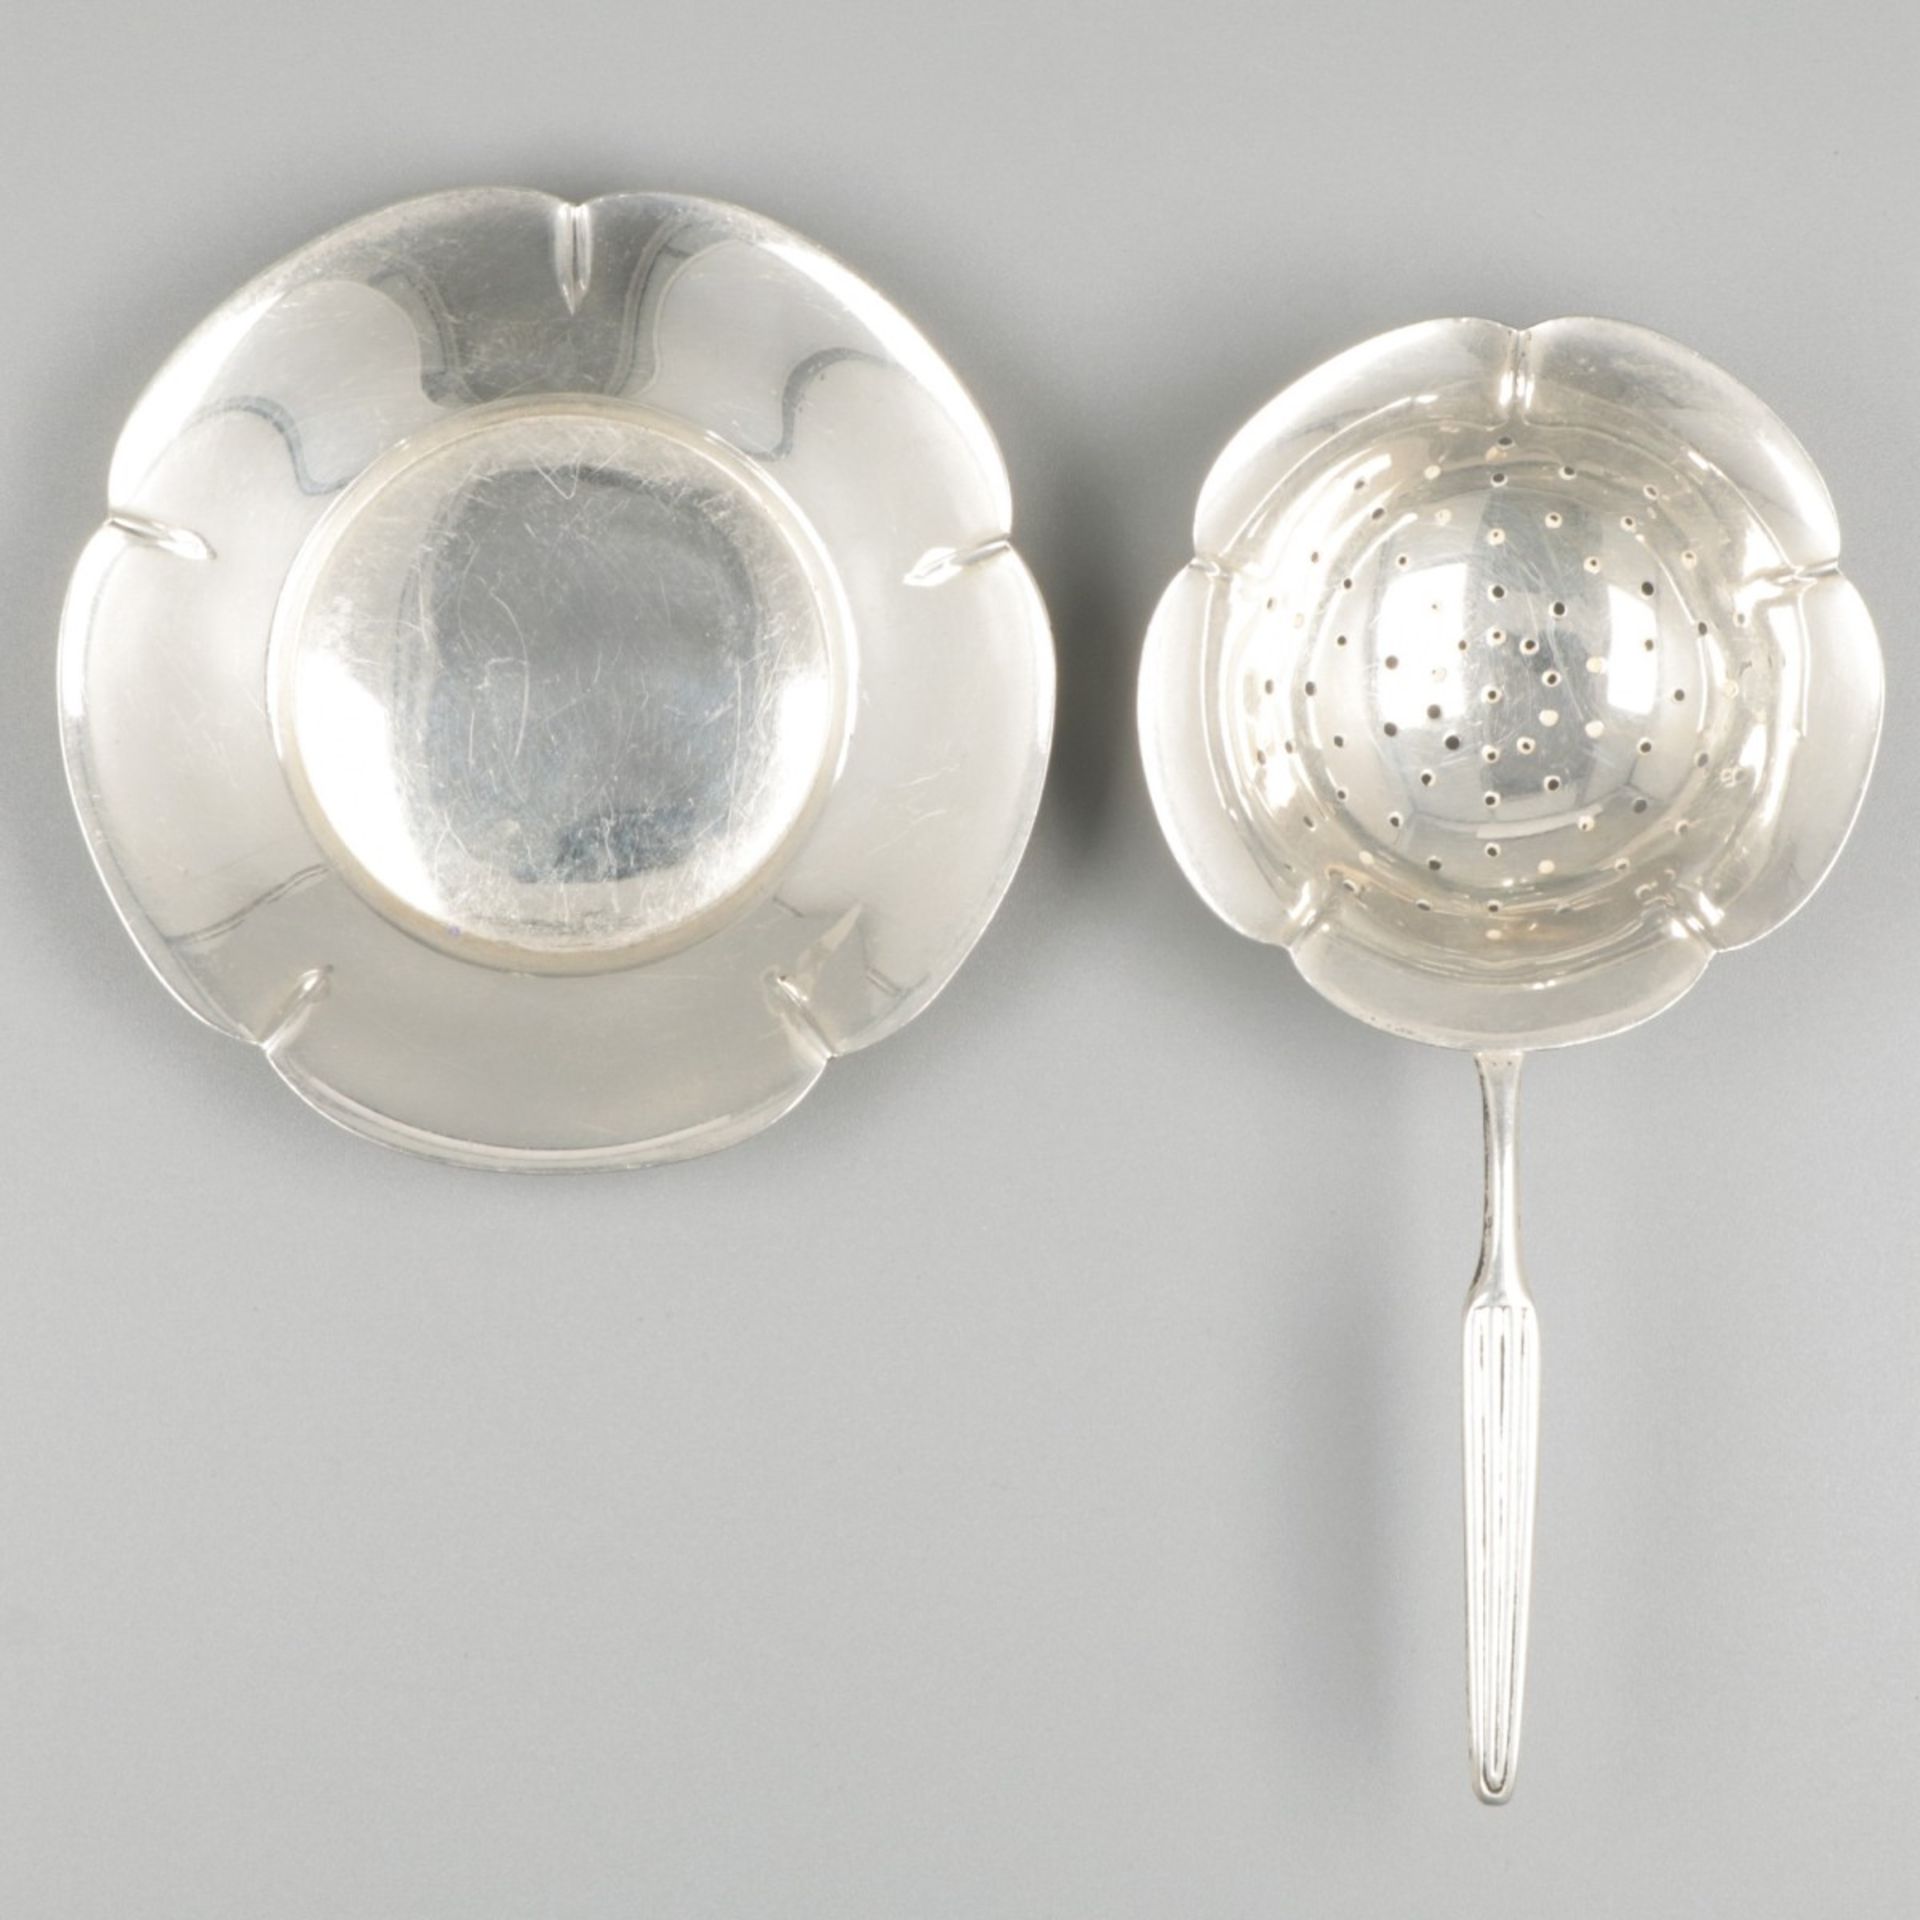 Tea strainer & drip tray silver. - Image 3 of 7